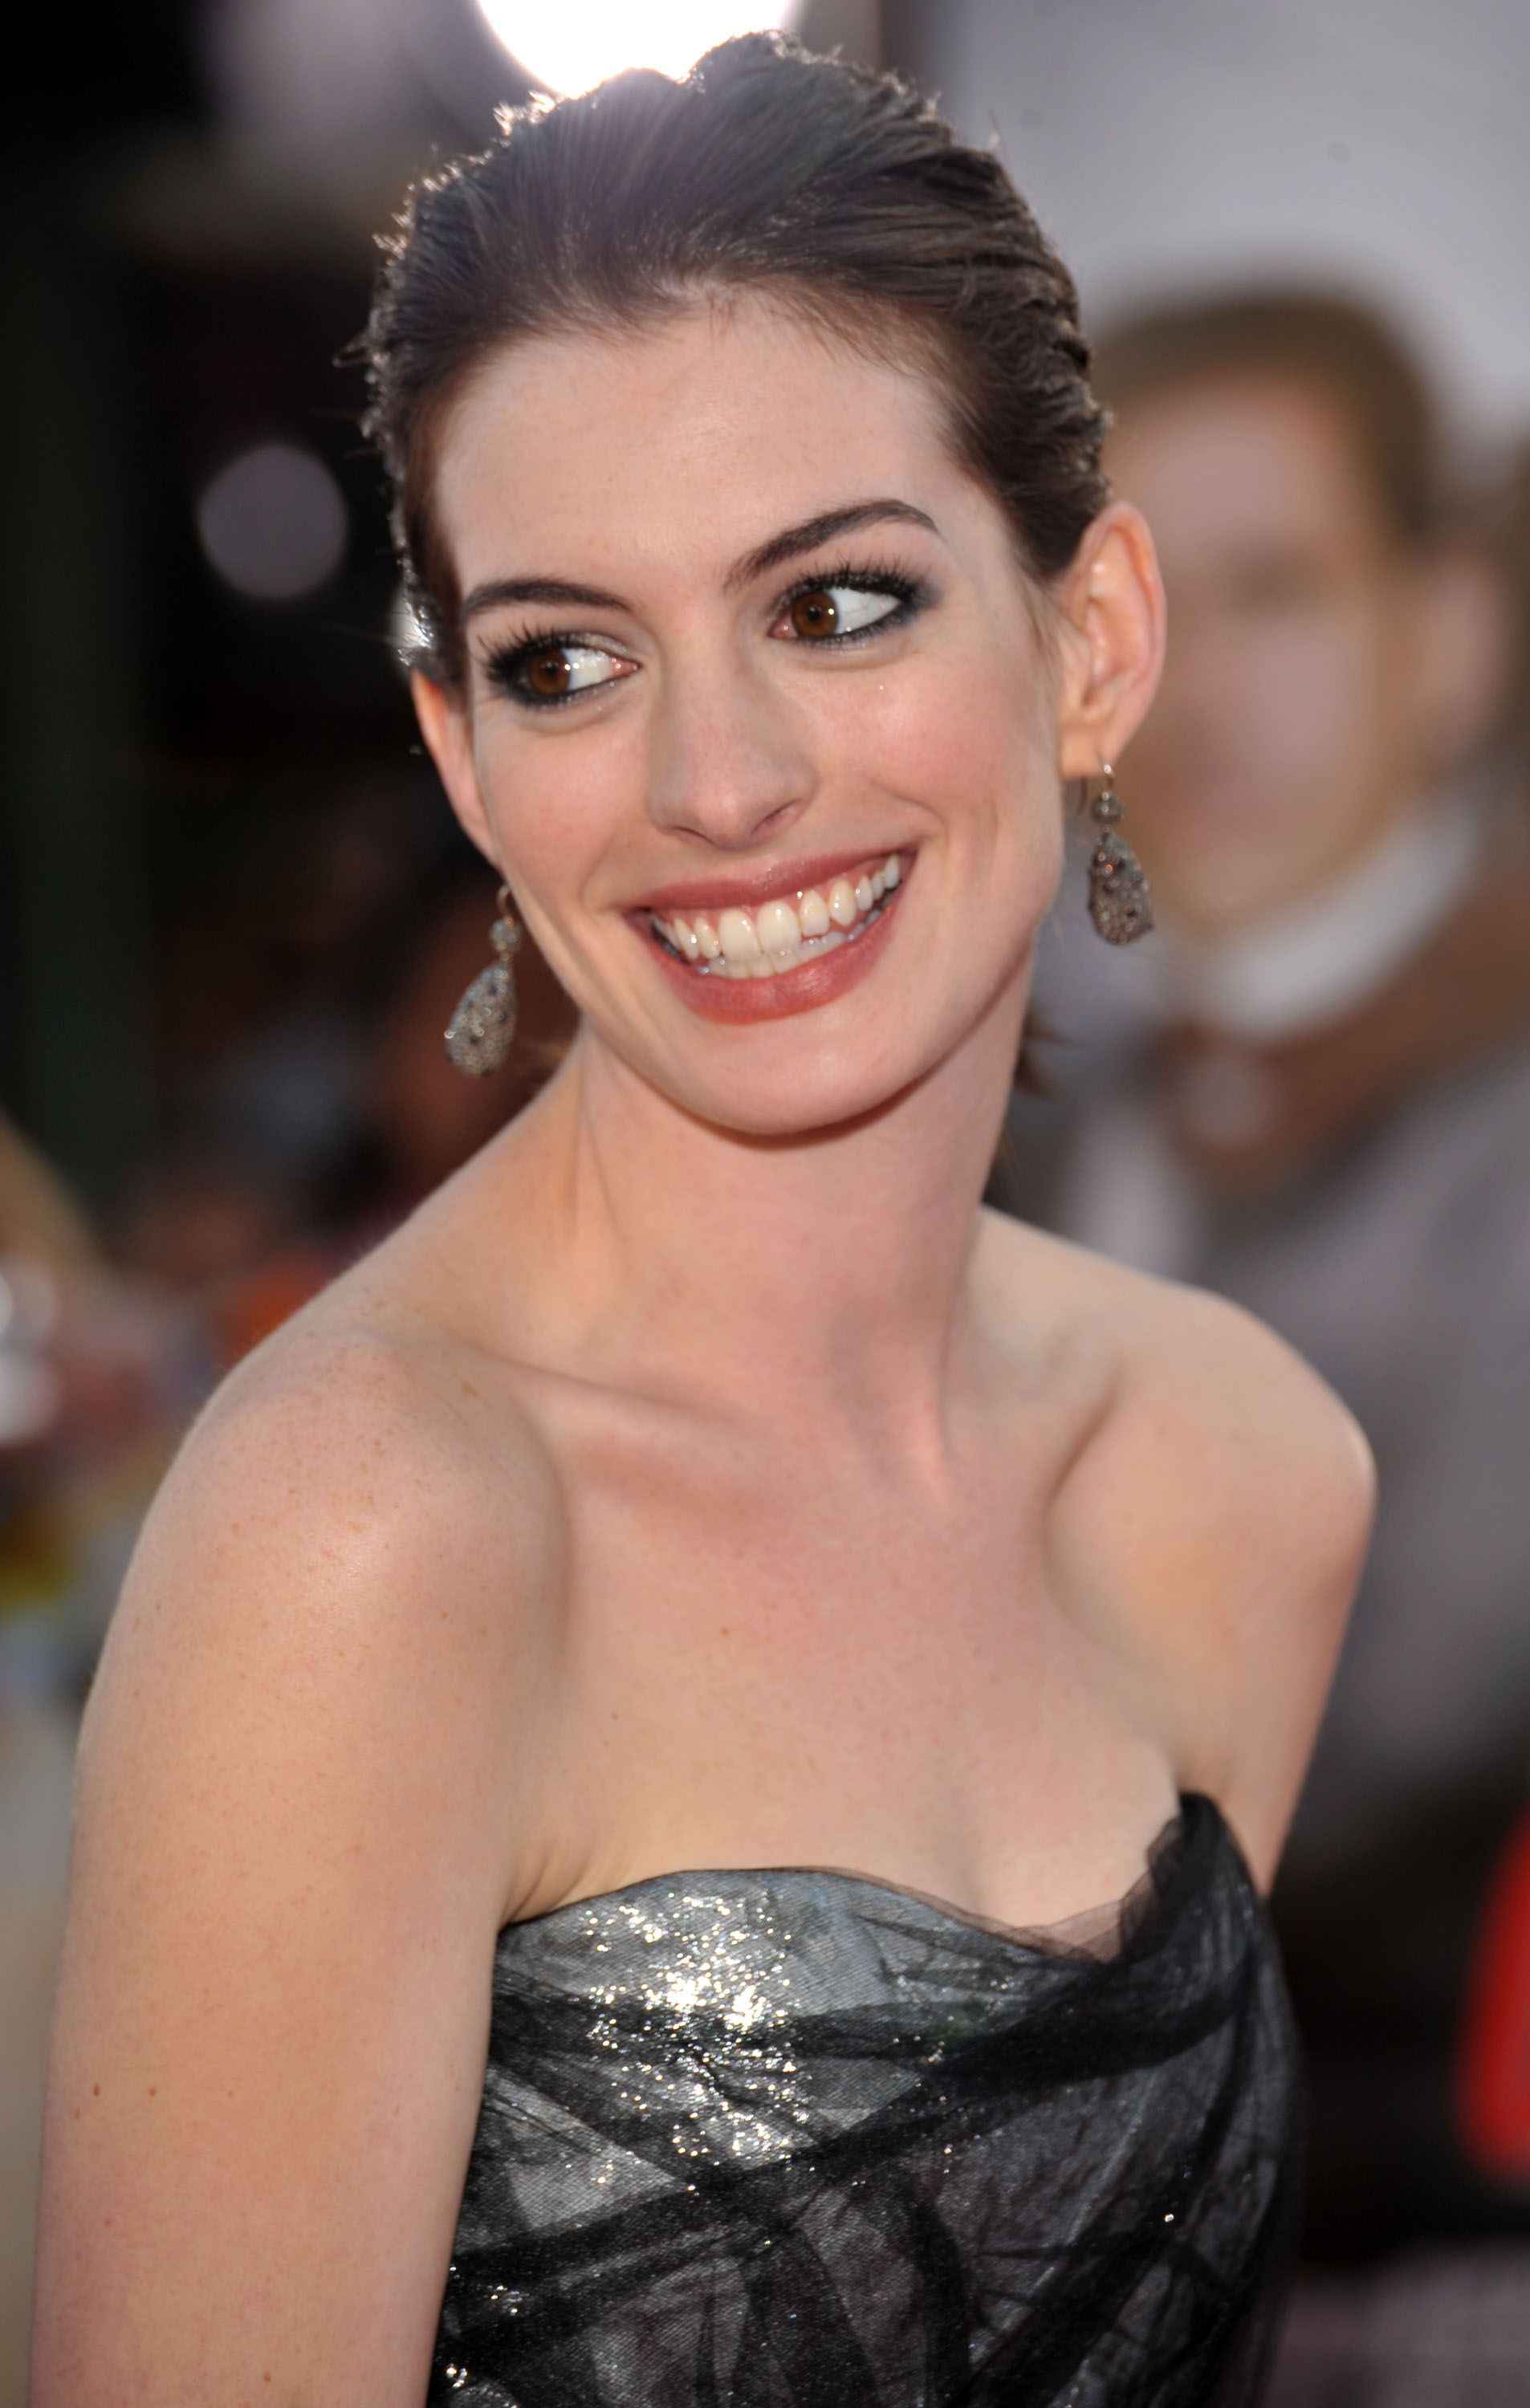 westwood, ca june 16 actress anne hathaway arrives at warner bros world premiere of get smart on june 16, 2008 at the mann village theatre in westwood, california photo by lester cohenwireimage